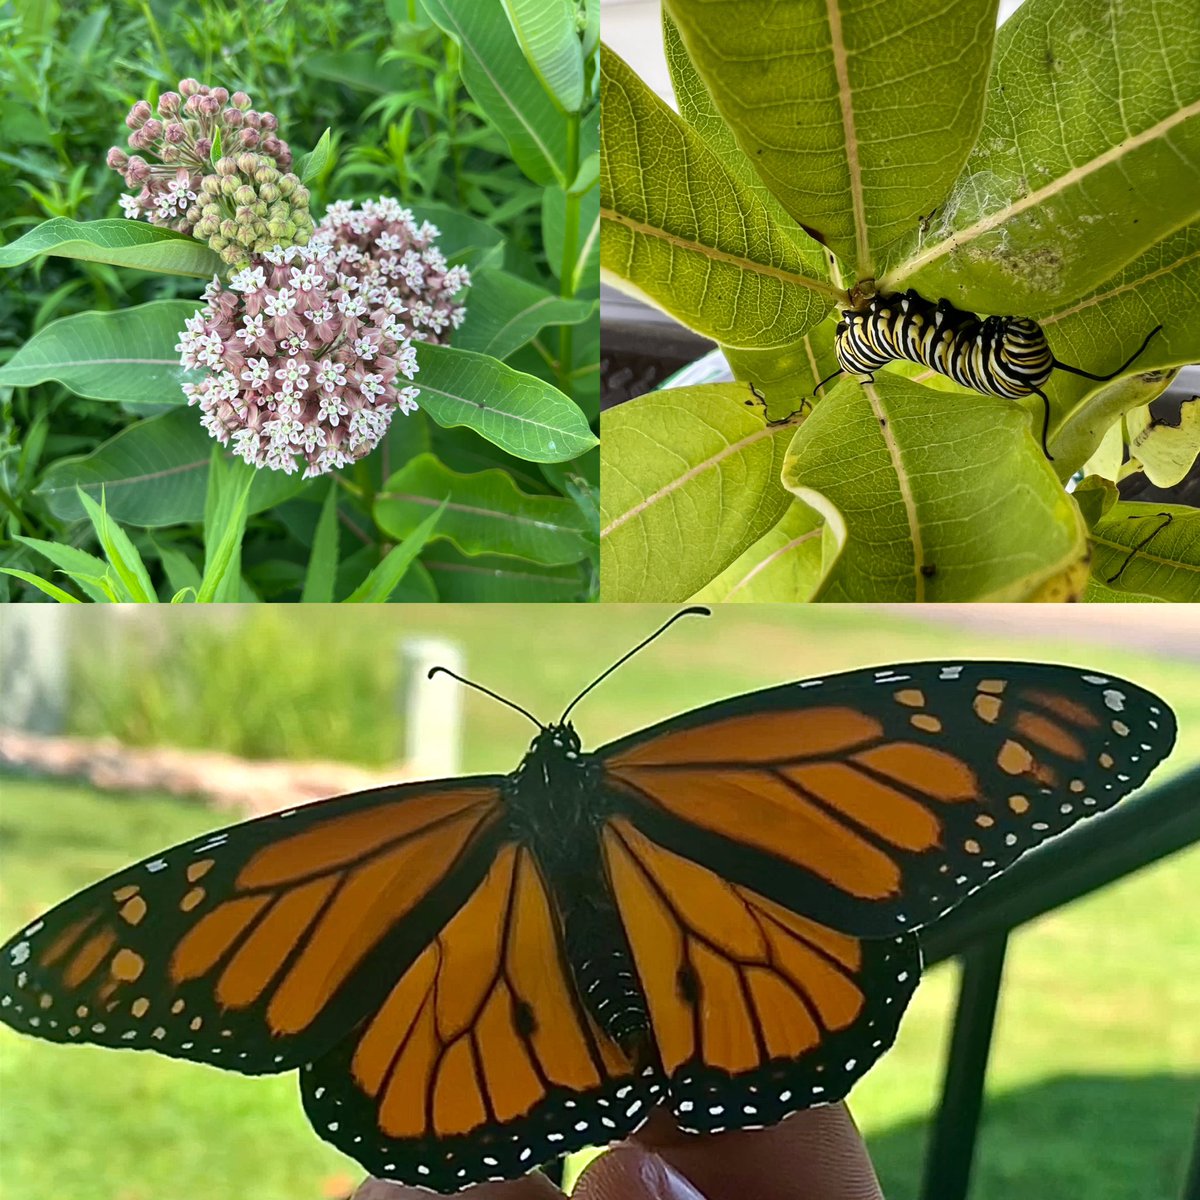 I’ve been fascinated with the Monarch butterfly life cycle since the 2nd grade

I’ve raised a few over the last couple years to show my kids, as the population continues to plummet. 10 likes I’ll share my butterfly activities this summer #ButterflyChainGang 🦋👺
#SaveTheMonarchs